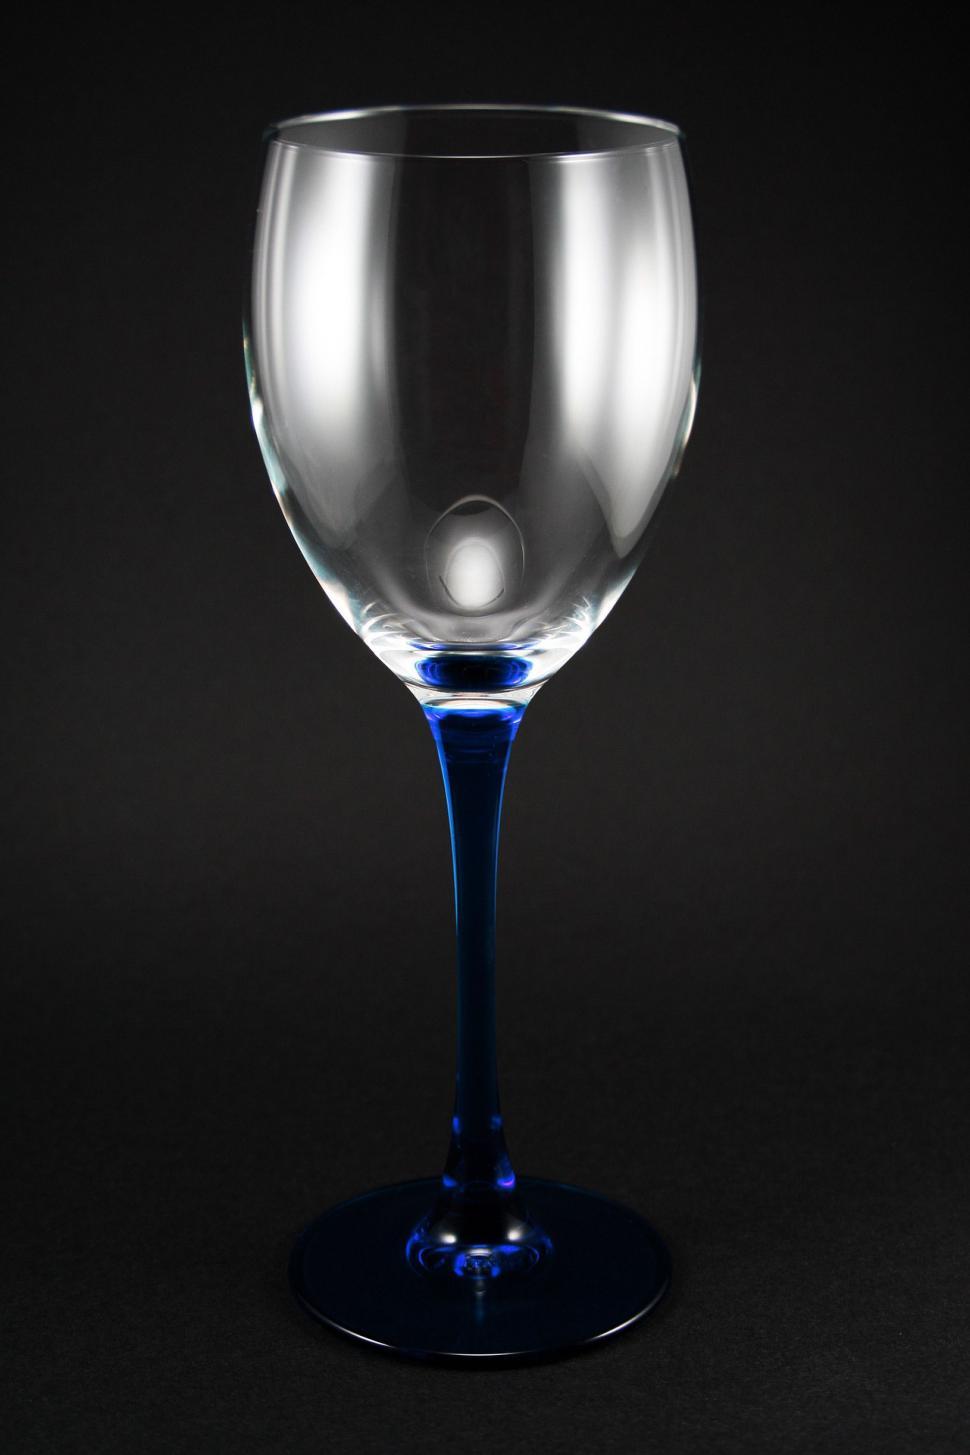 Free Image of Wine Glass on Table 